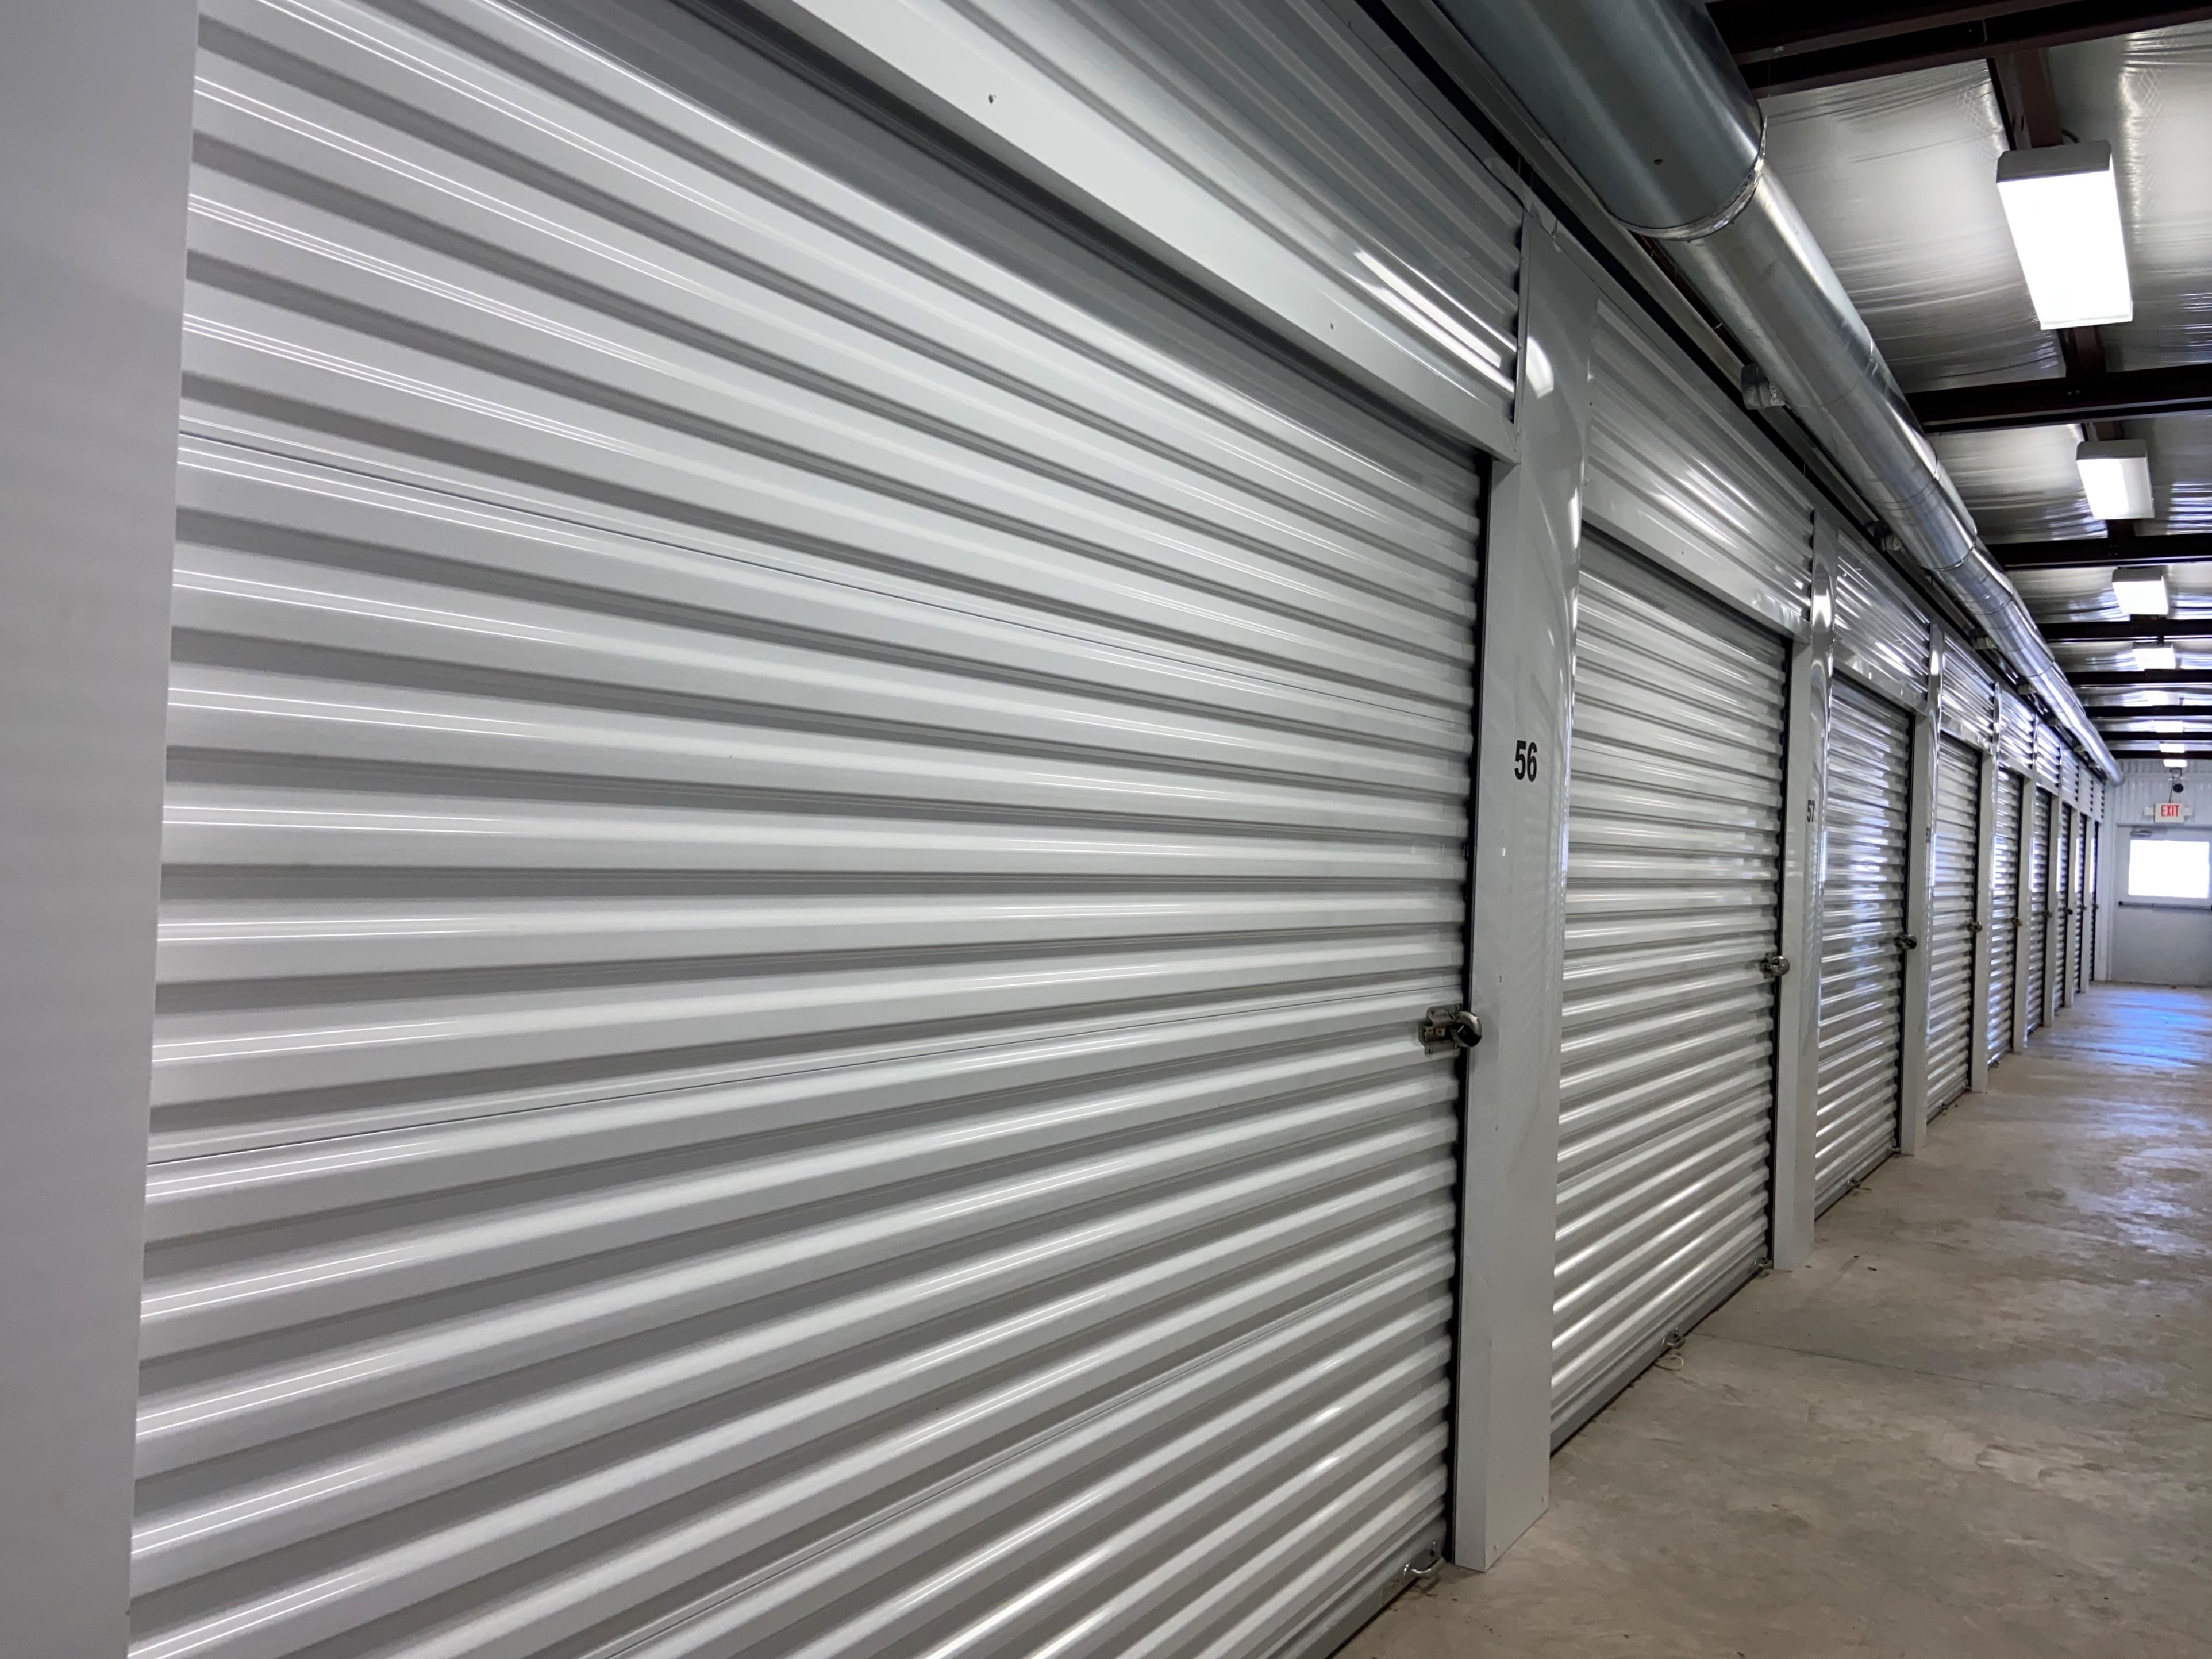 Learn more about features at KO Storage in Port Allen, Louisiana